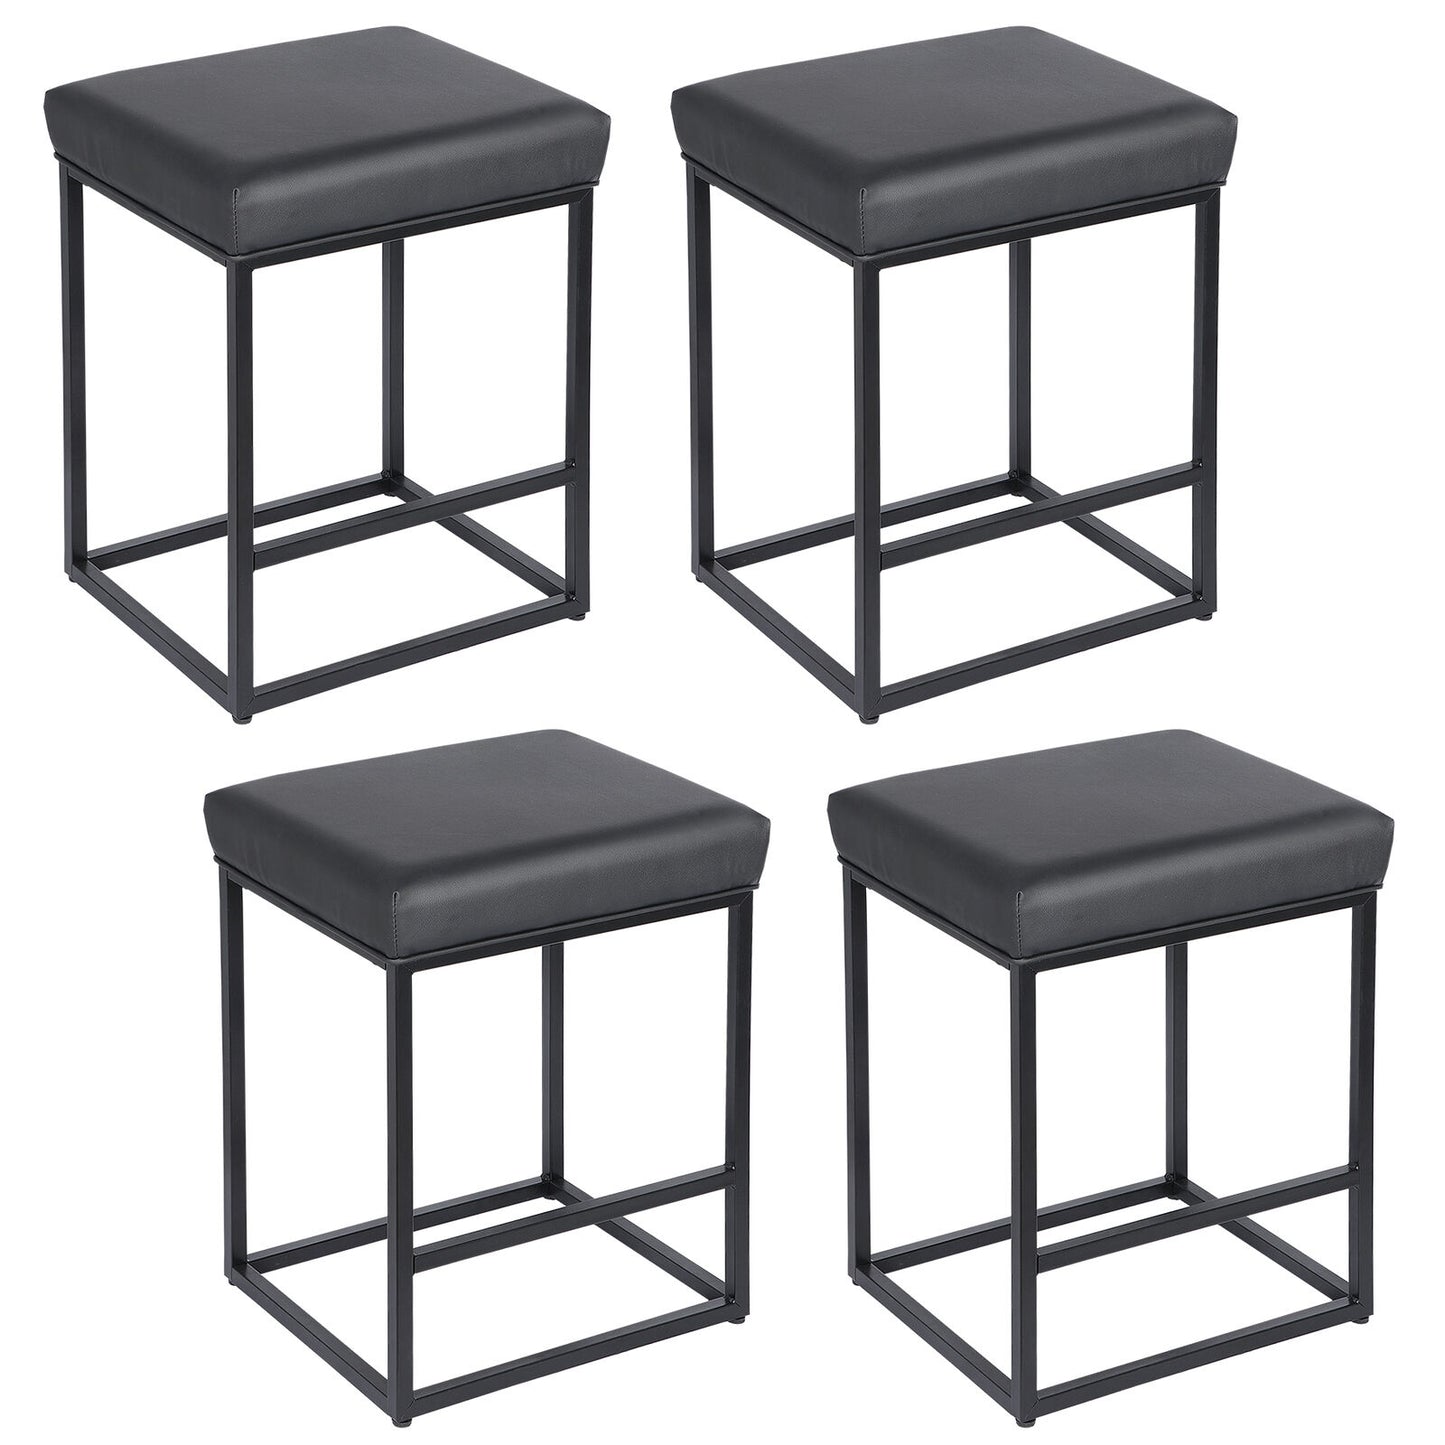 24" Set of 4 Counter Stools & Bar Stools Backless PU Leather With Footrest Black